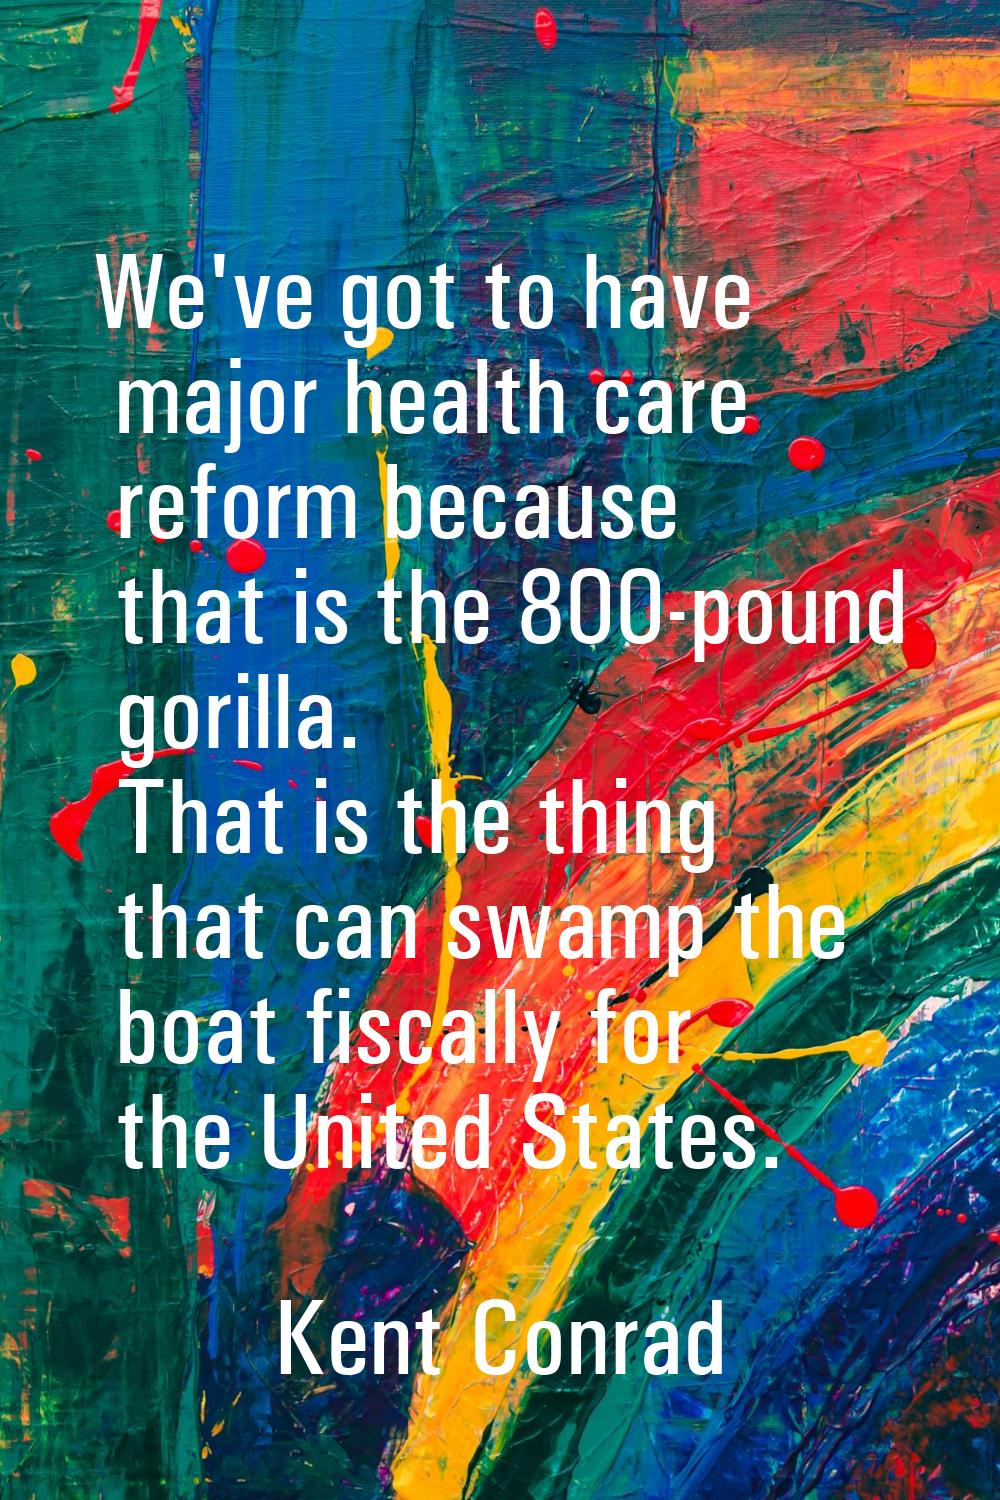 We've got to have major health care reform because that is the 800-pound gorilla. That is the thing